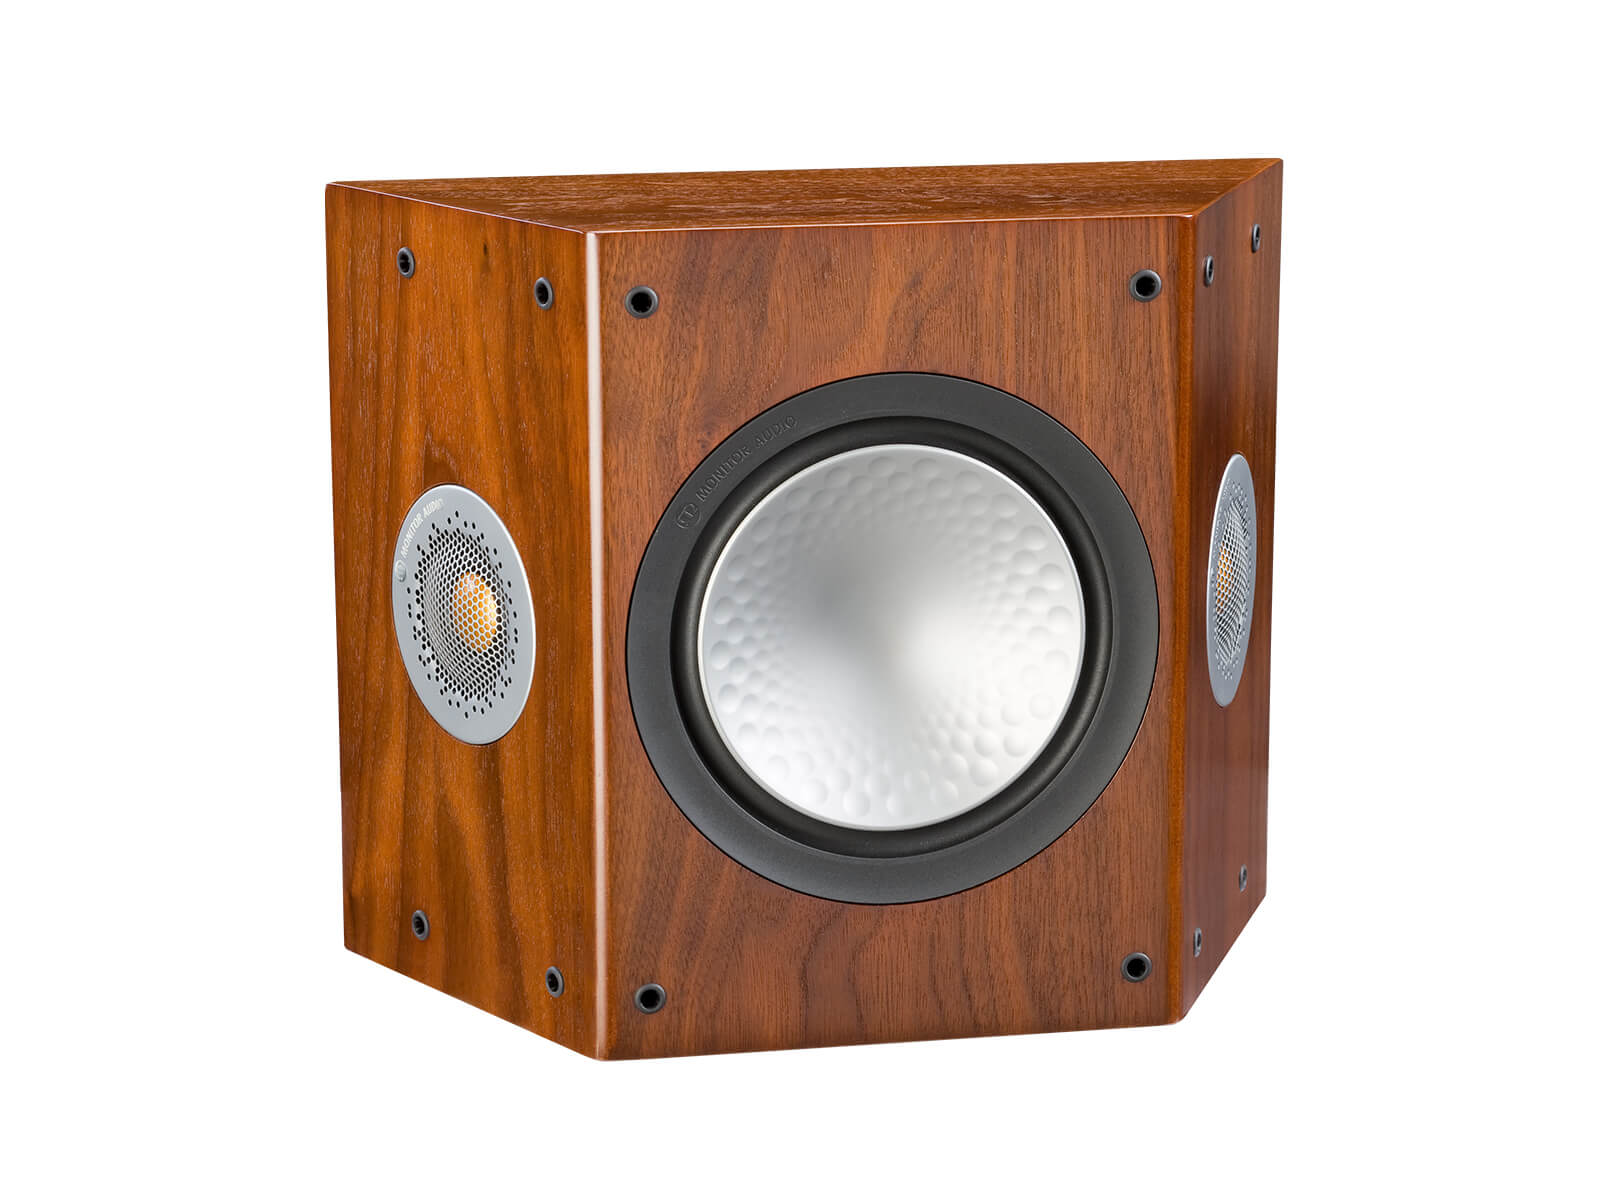 Silver FX, grille-less surround speakers, with a walnut finish.